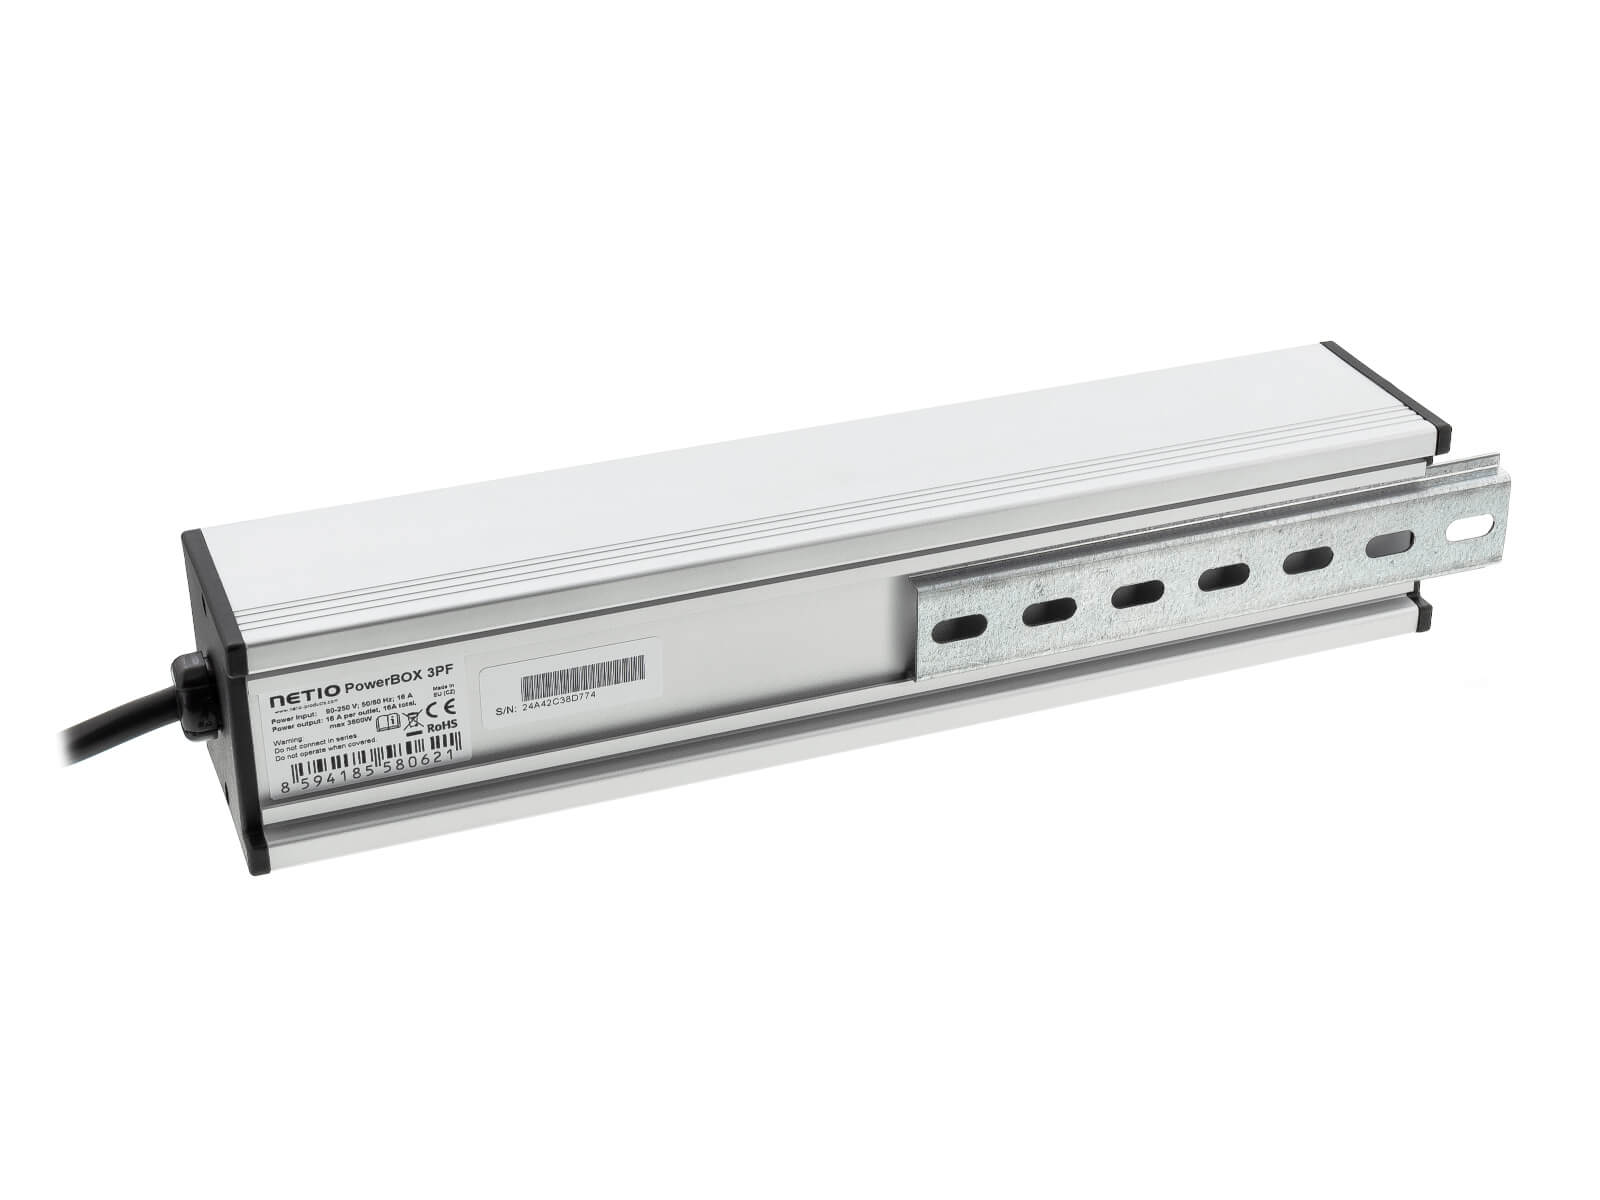 PowerBOX 3PF is smart power-strip PDU with LAN connectivity. Each output can be switched individually.  Device web configuration, ZVS, NETIO Cloud, Open API protocols (MQTT-flex, JSON, Modbus/TCP, SNMP)